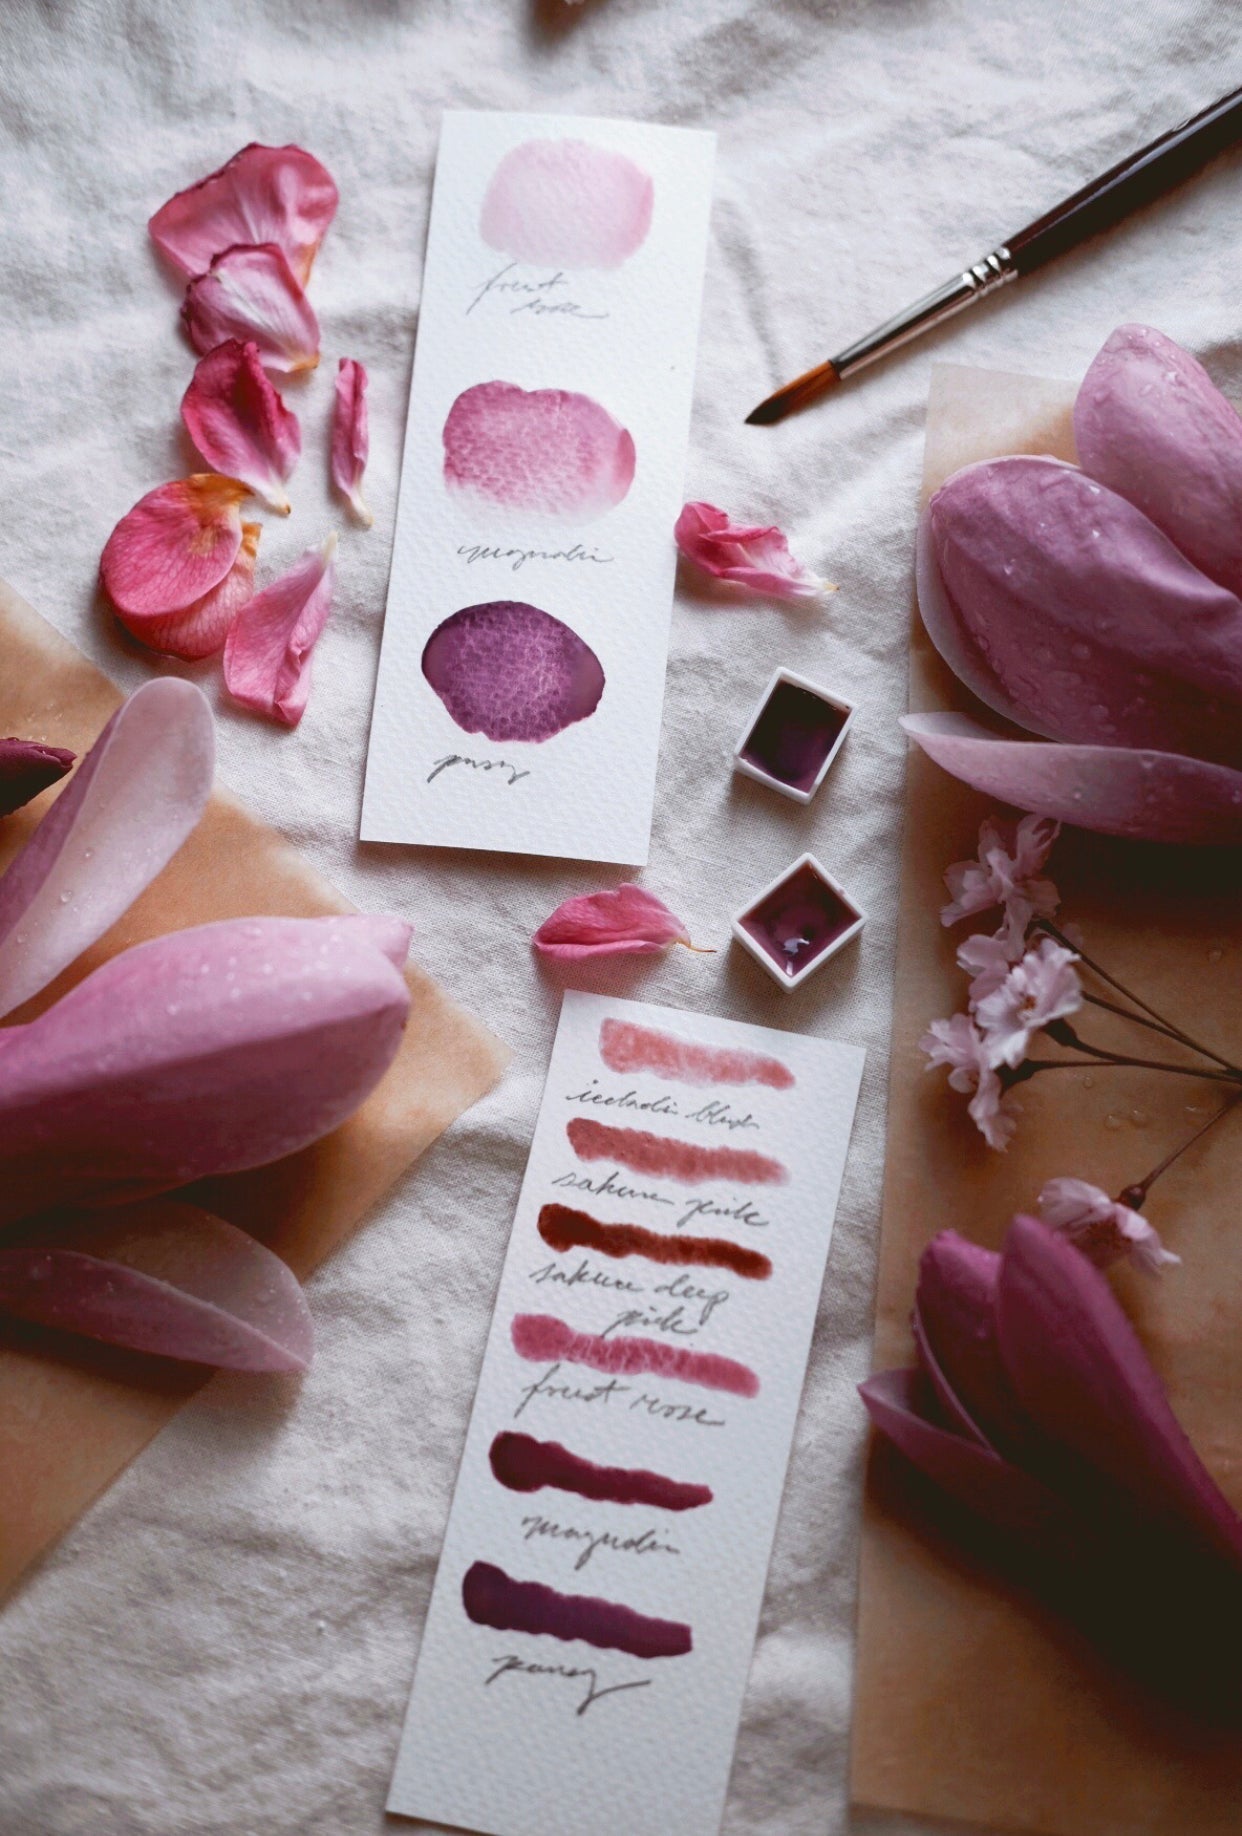 RESERVE for Debi + Pink Blossom + Voyager ii. Limited edition gemstone watercolor palette